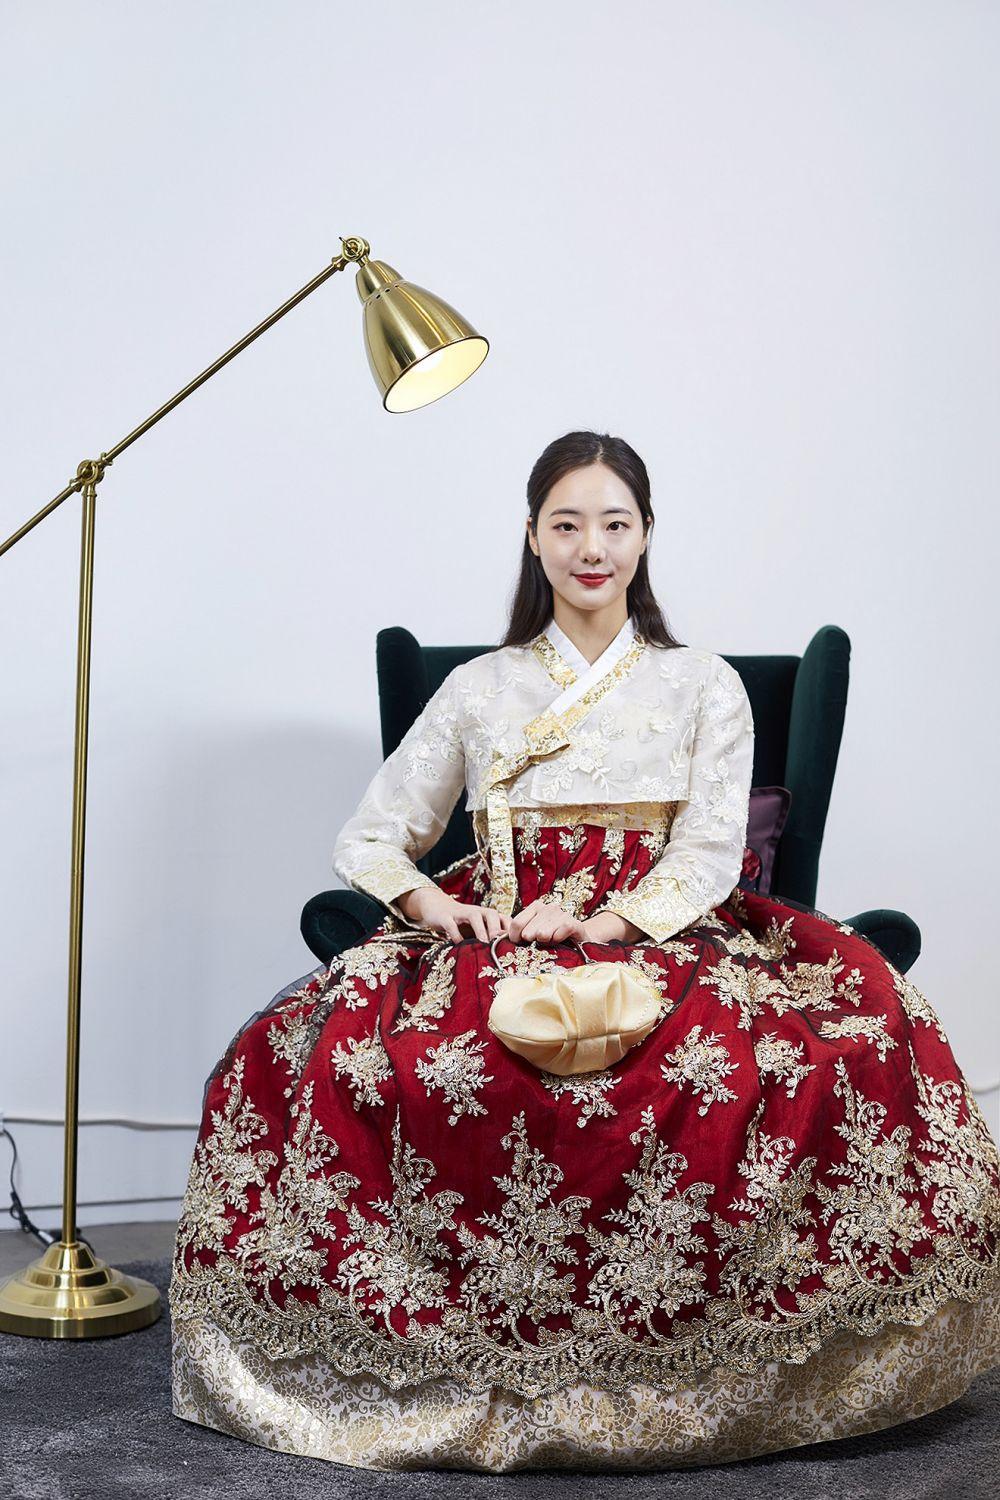 A woman wearing a traditional Korean gown with embellishments, smiling and looking at the camera.